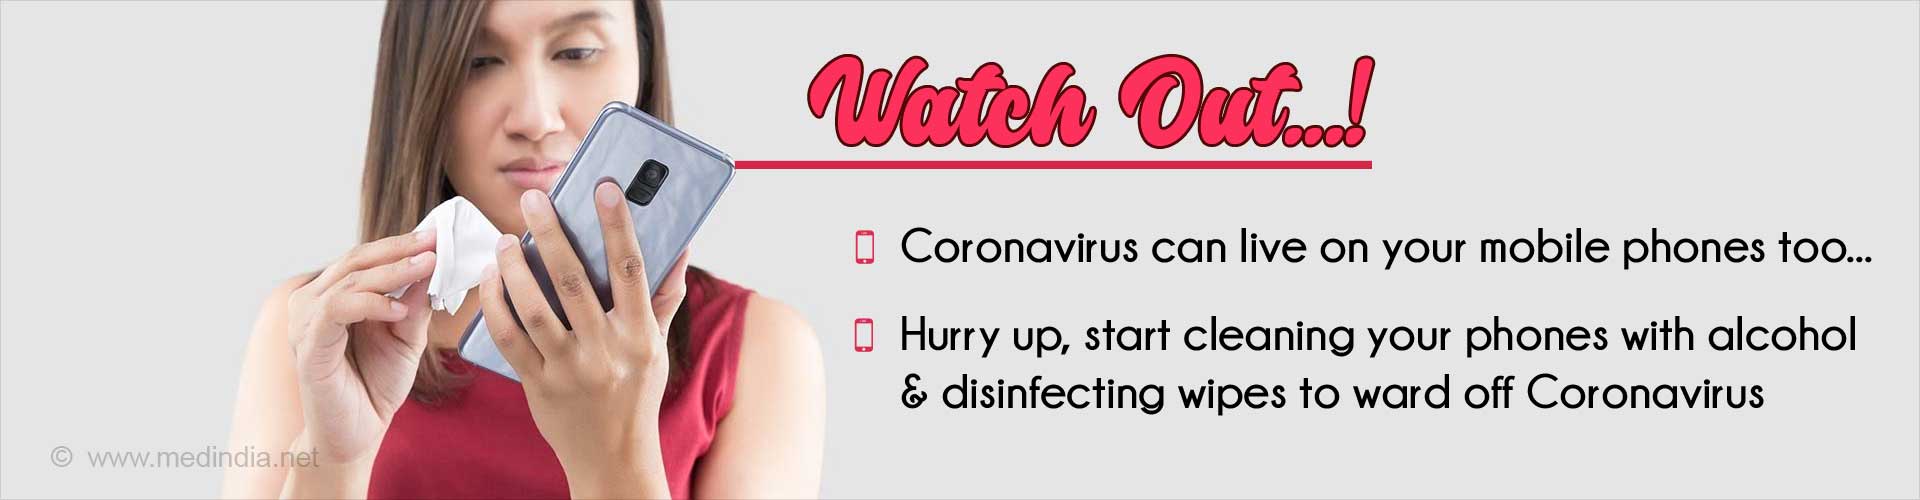 Wash Your Hands, Clean Your Phone to Stay Away from Coronavirus